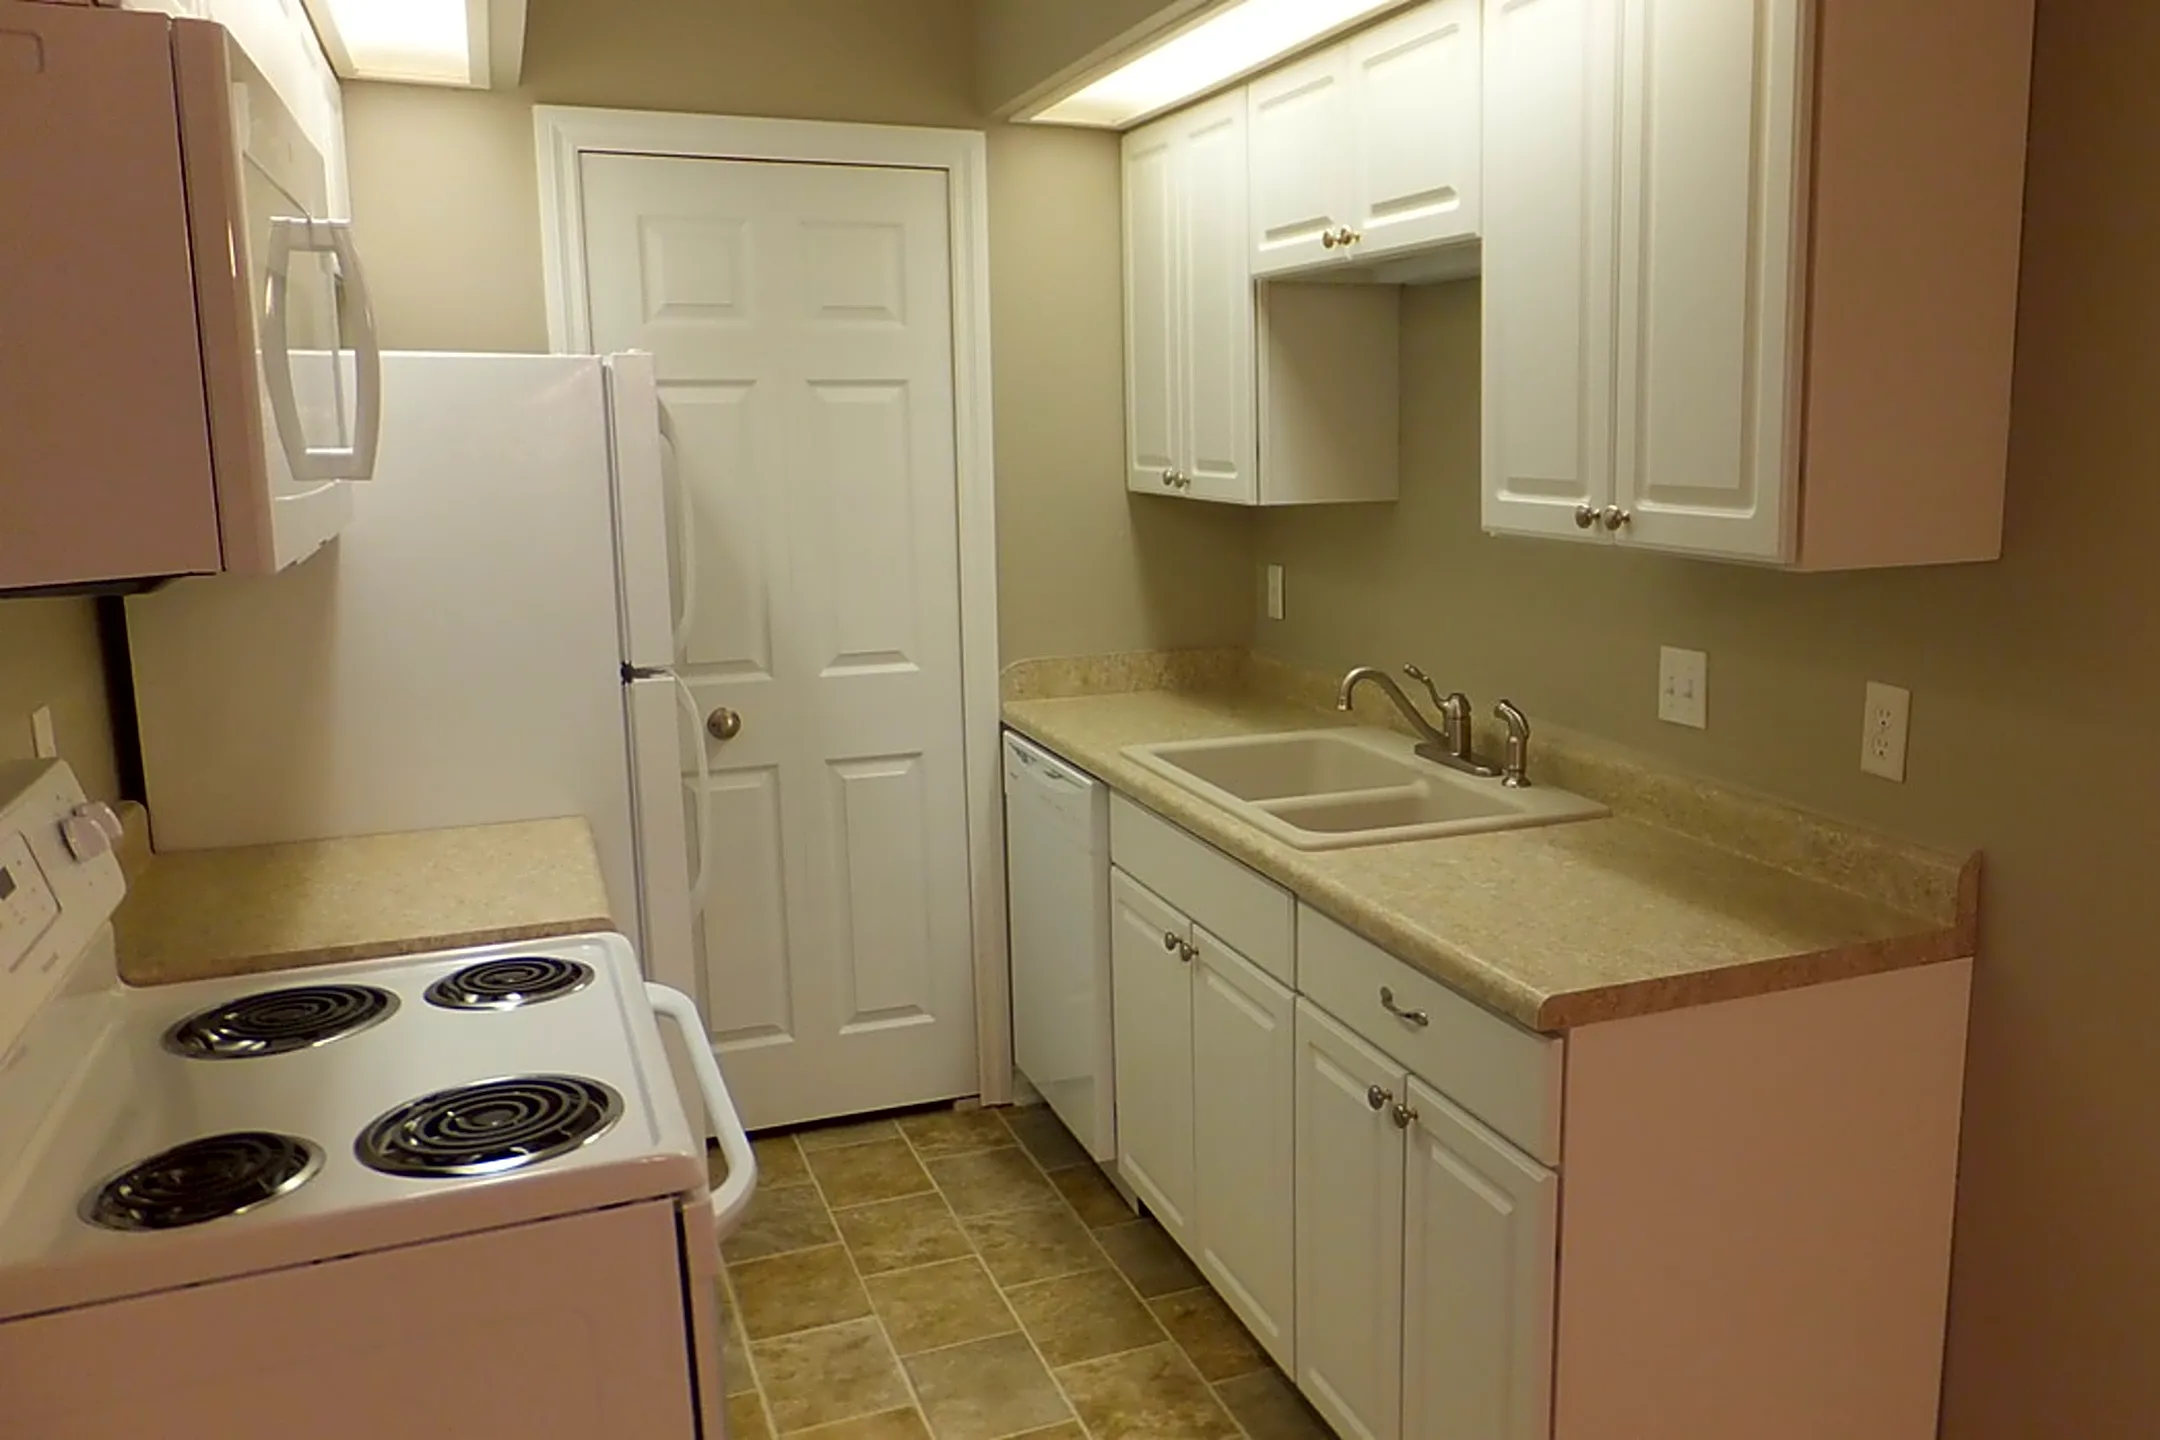 Kitchen - Lake View Shores - Maumee, OH